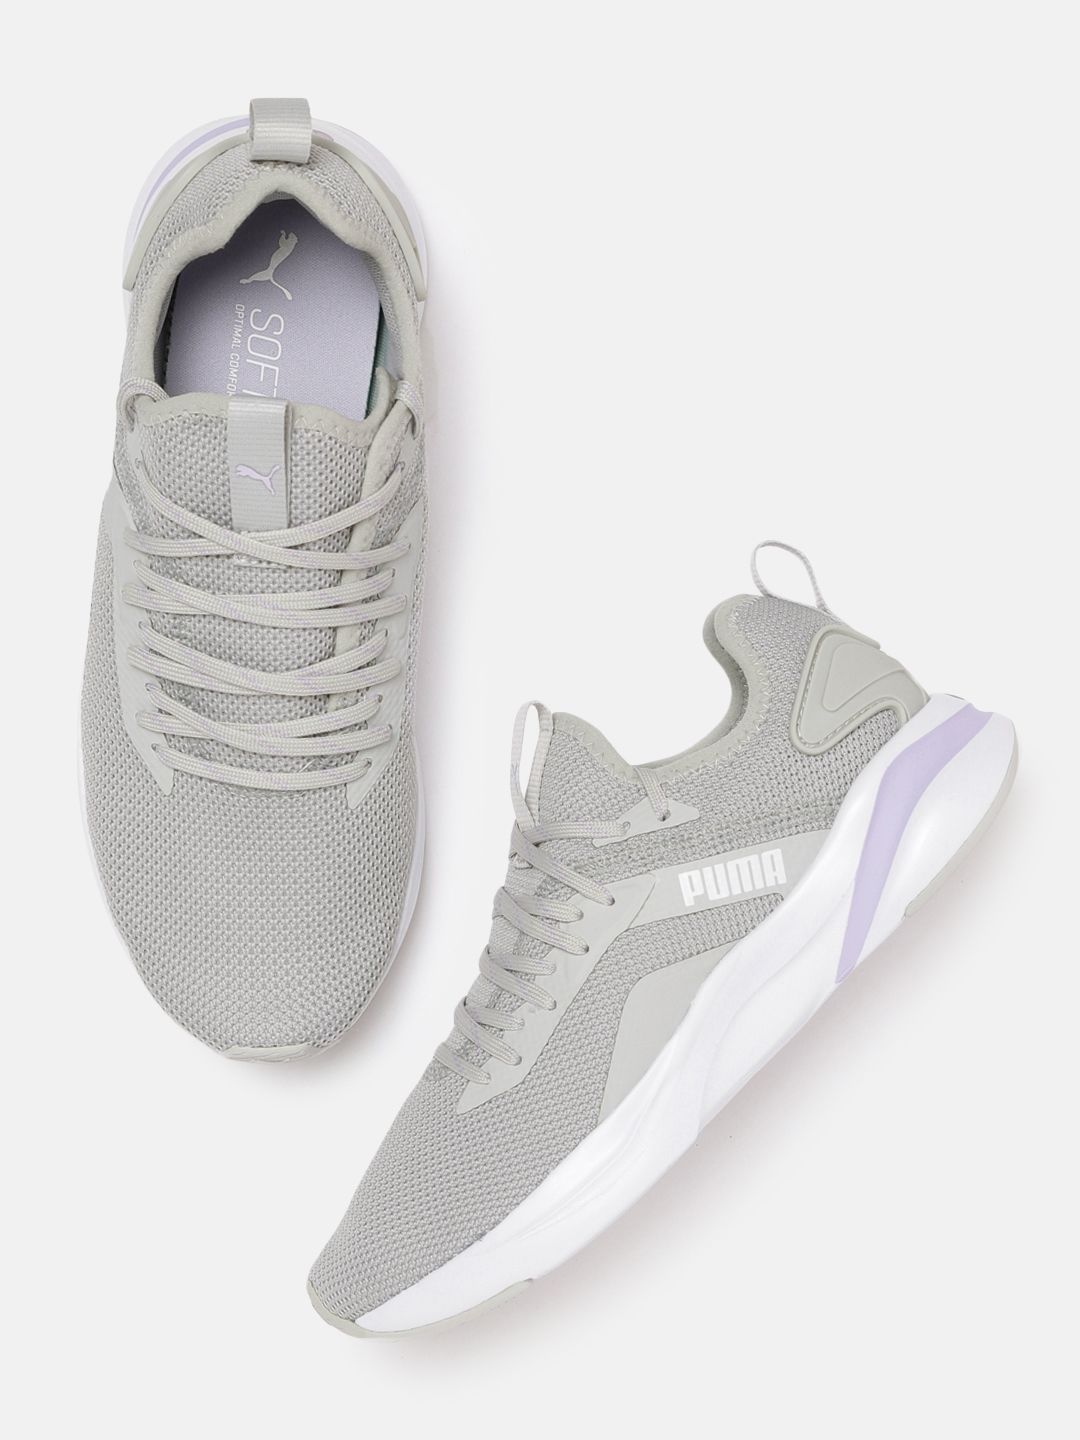 Puma Women Grey Softride Rift Knit Walking Shoes Price in India